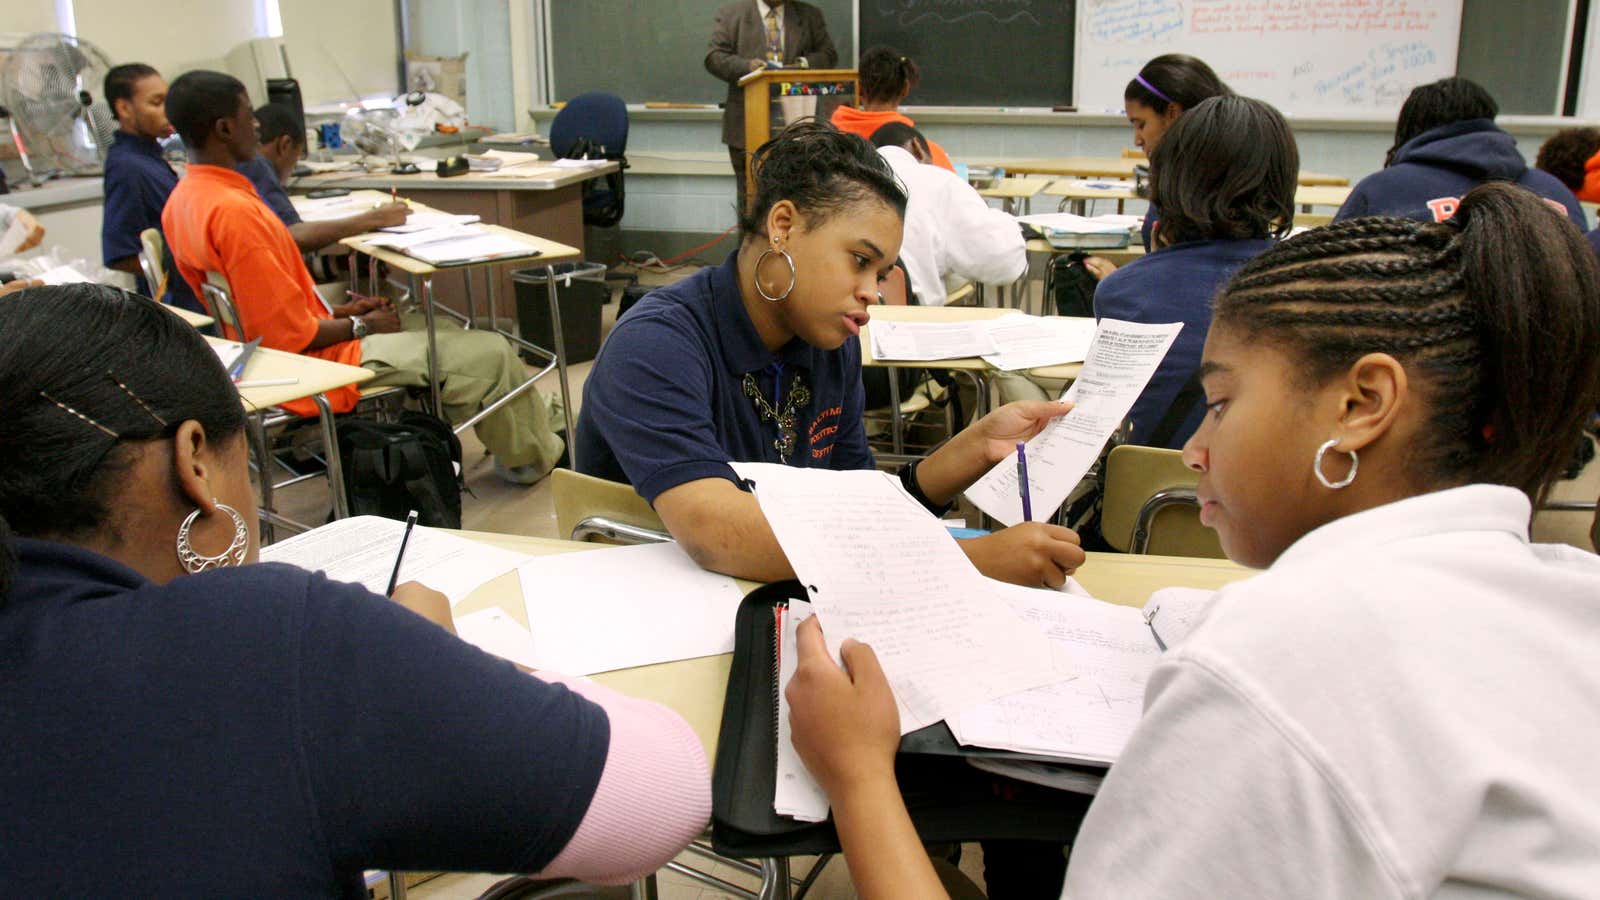 Affirmative action could help students before they get to college.